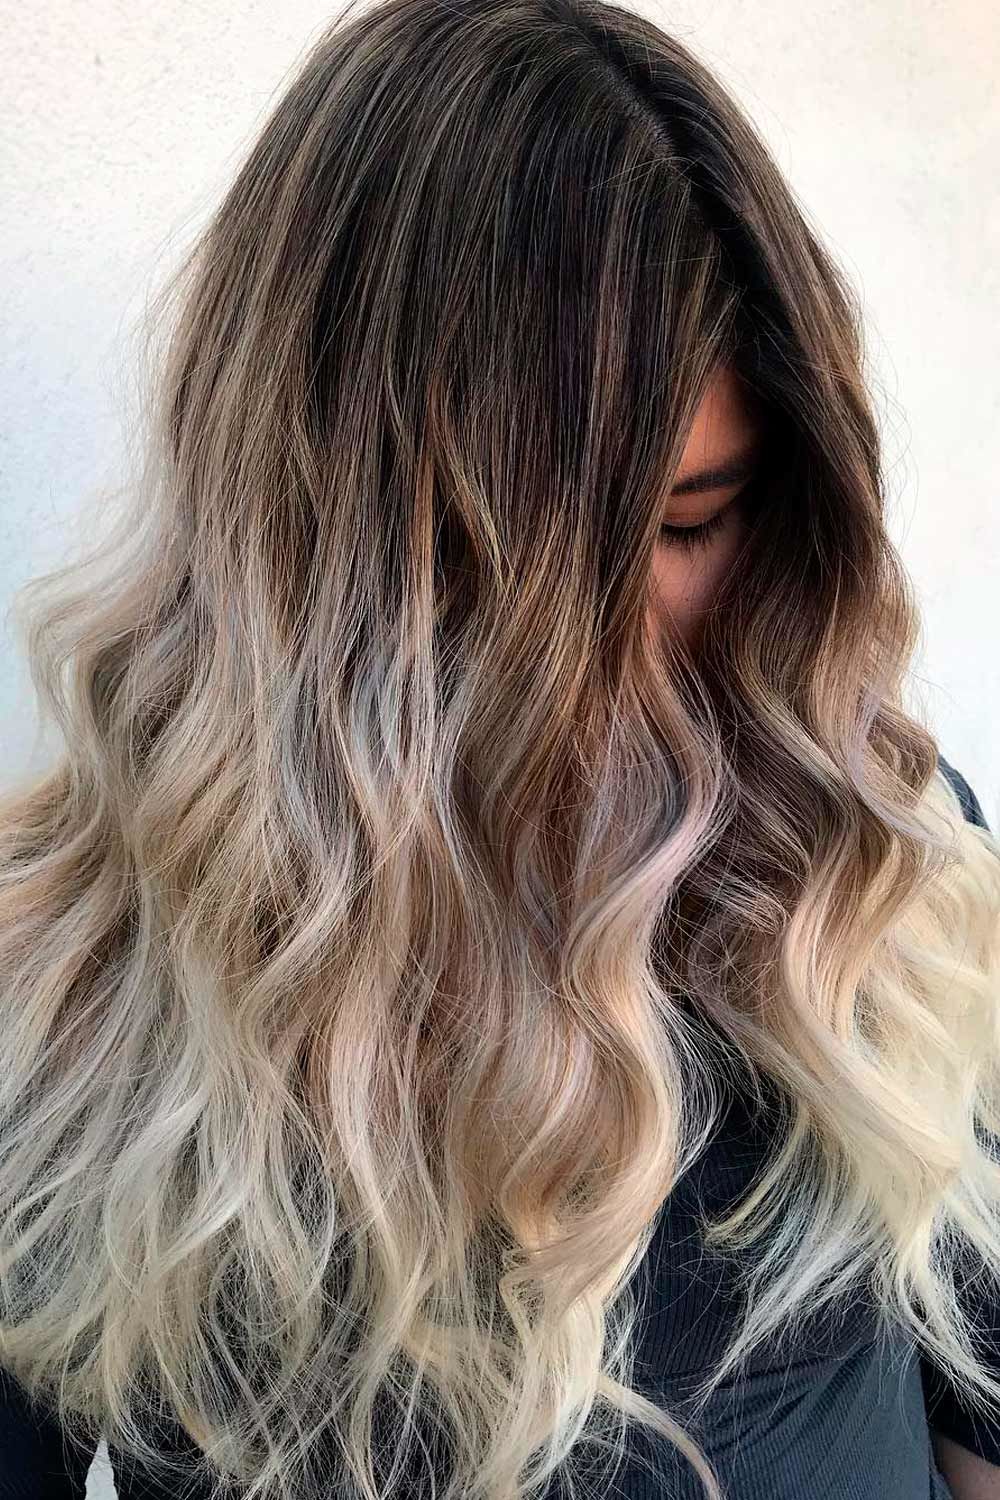 Black and Blonde Long Hair Ombre, black and blonde curly hair, black and blonde ombre hair